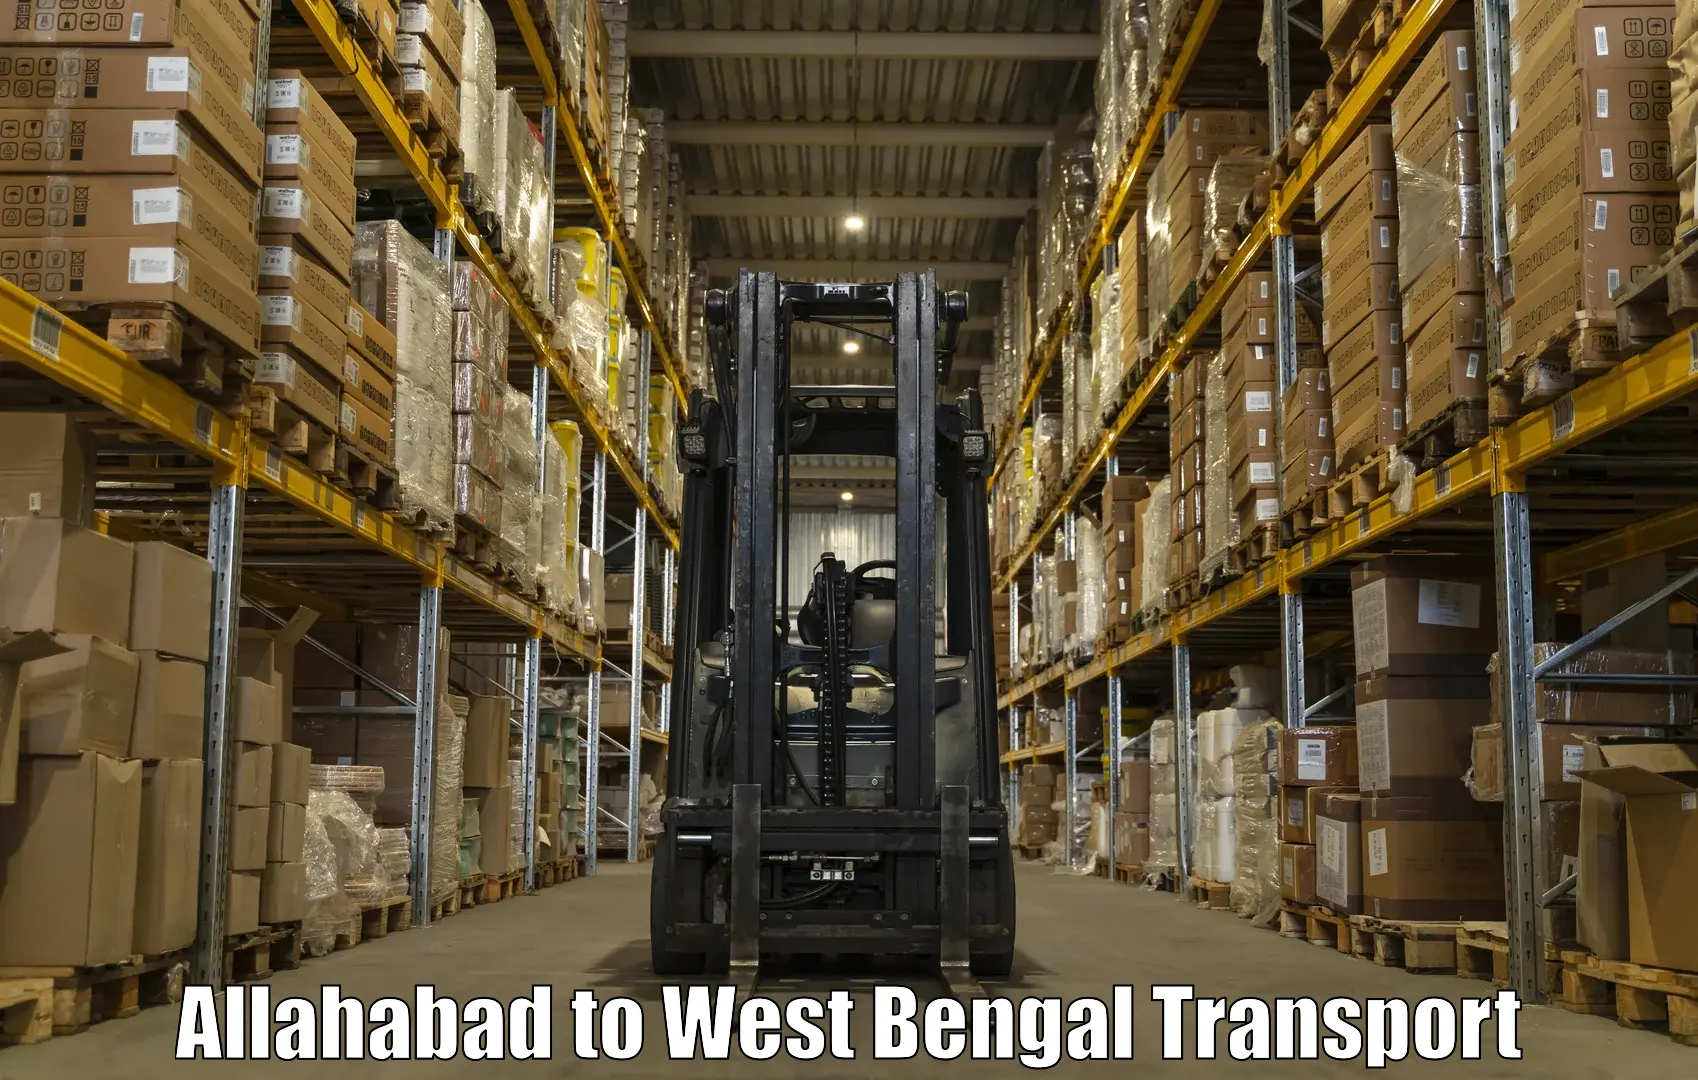 Cycle transportation service Allahabad to West Bengal